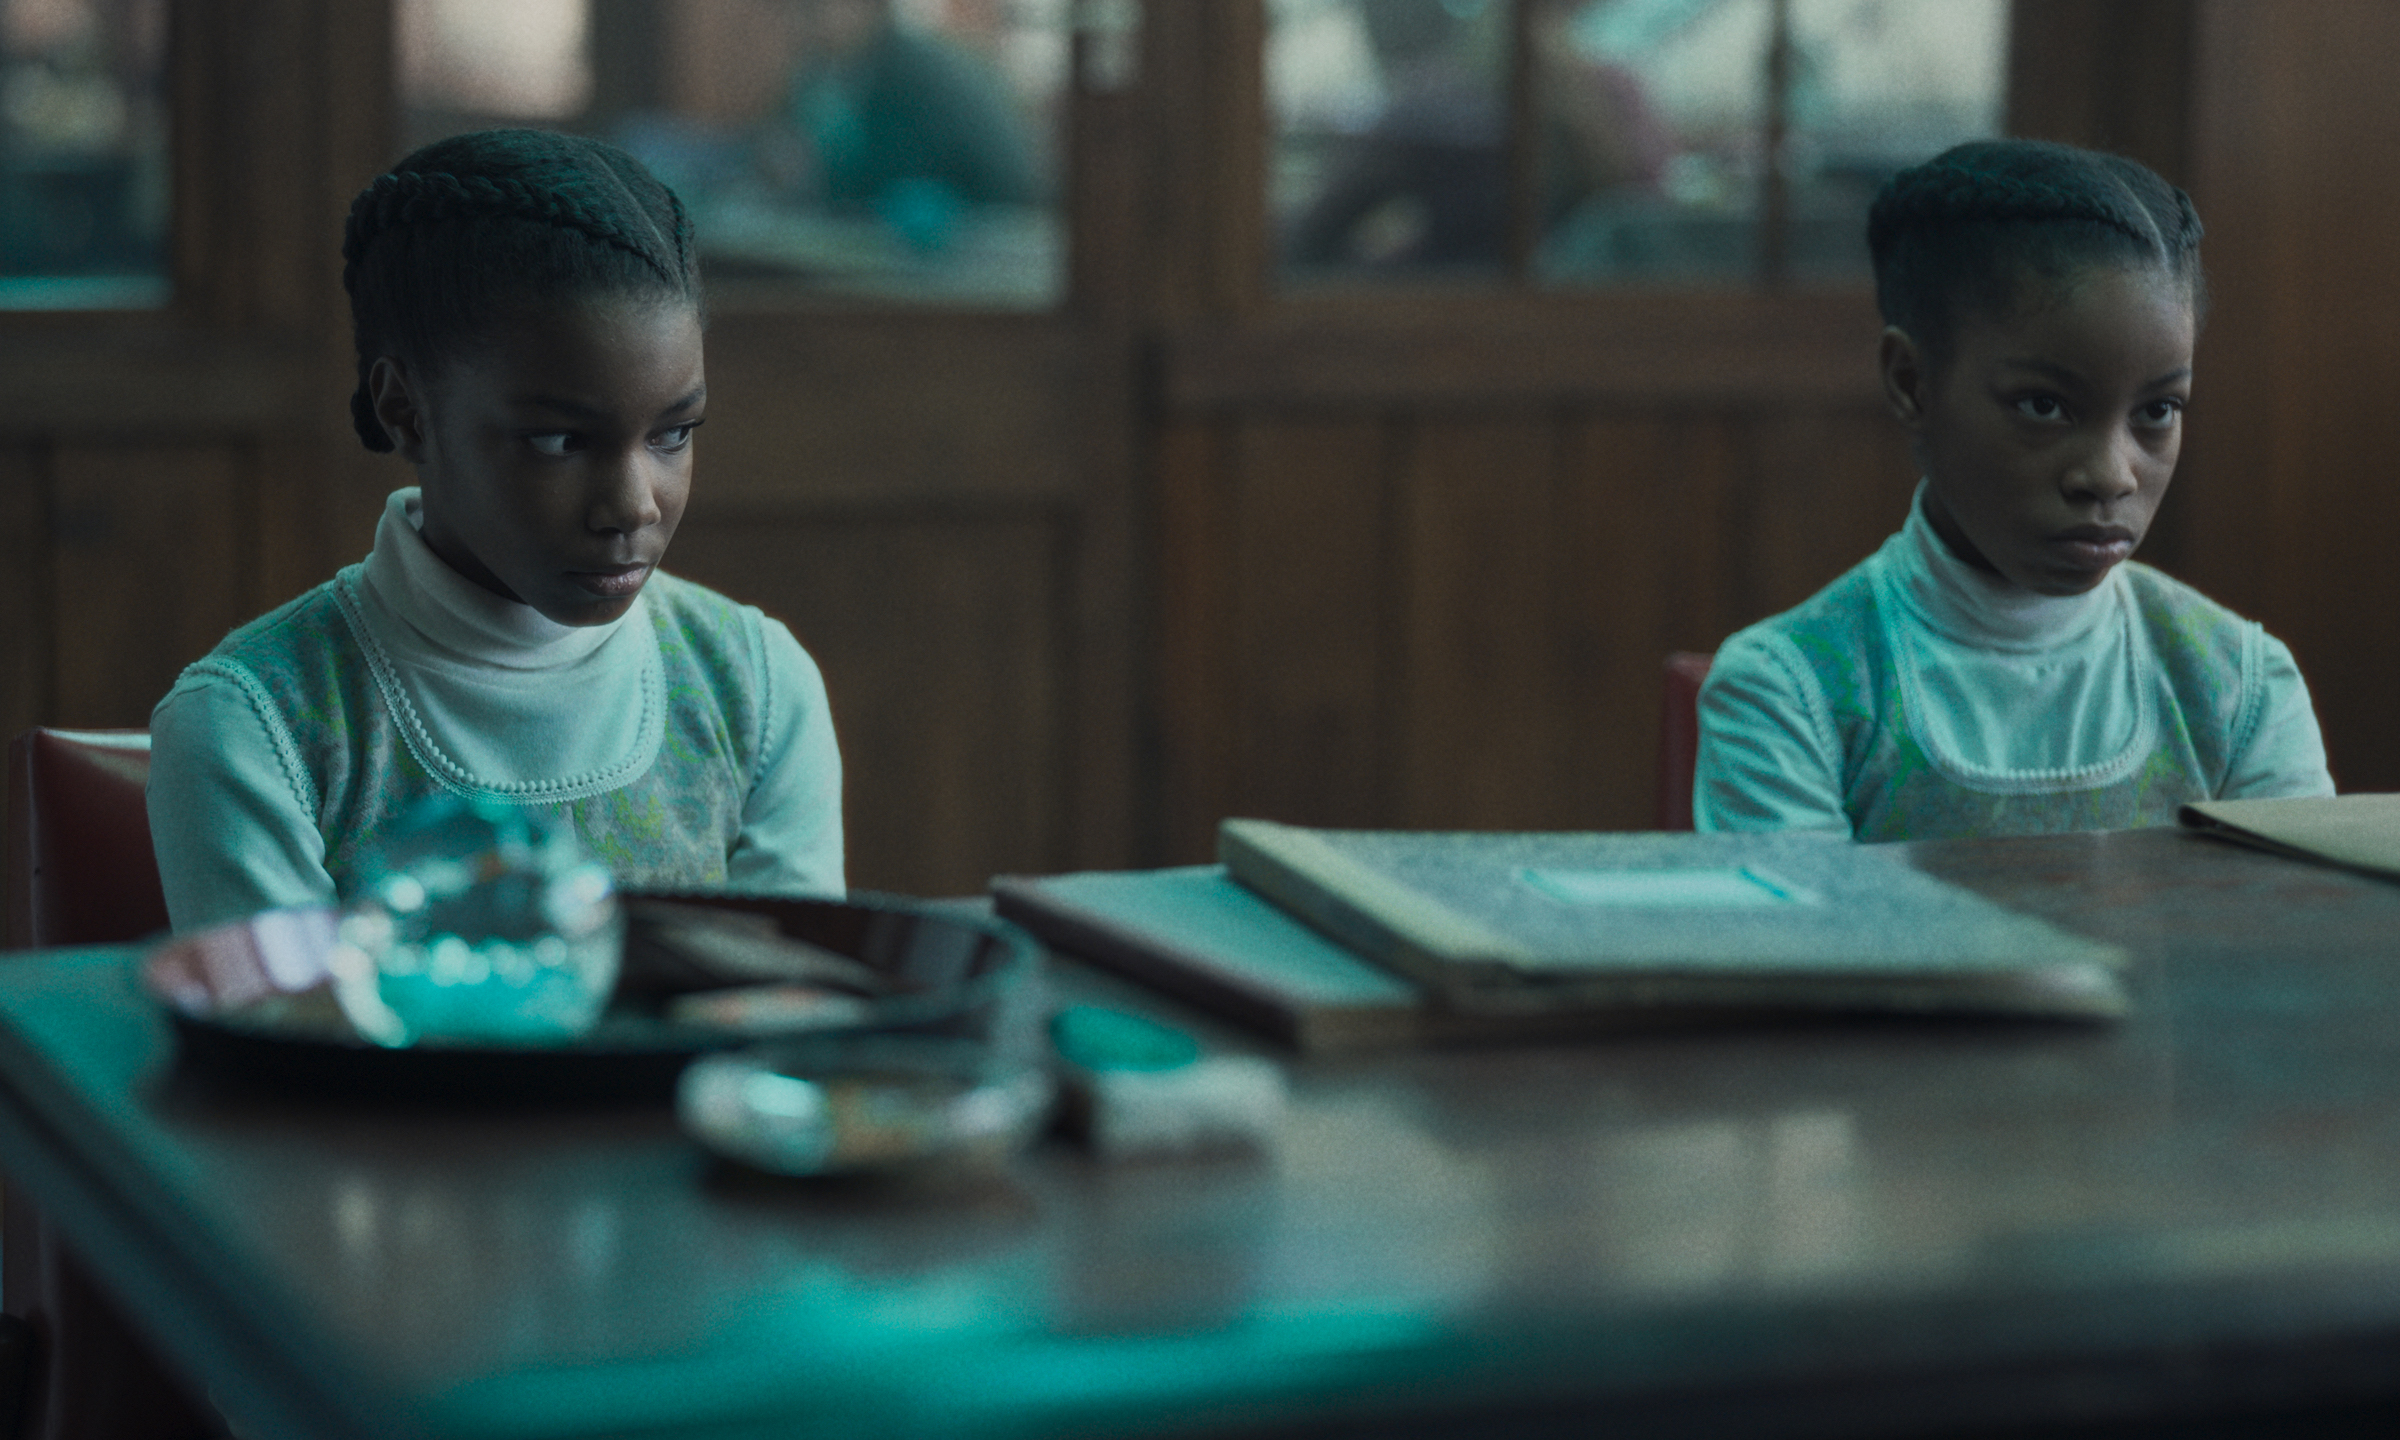 Leah Mondesir Simmons as young June Gibbons and Eva-Arianna Baxter as young Jennifer Gibbons in 'The Silent Twins' (Jakub Kijowski—Focus Features)